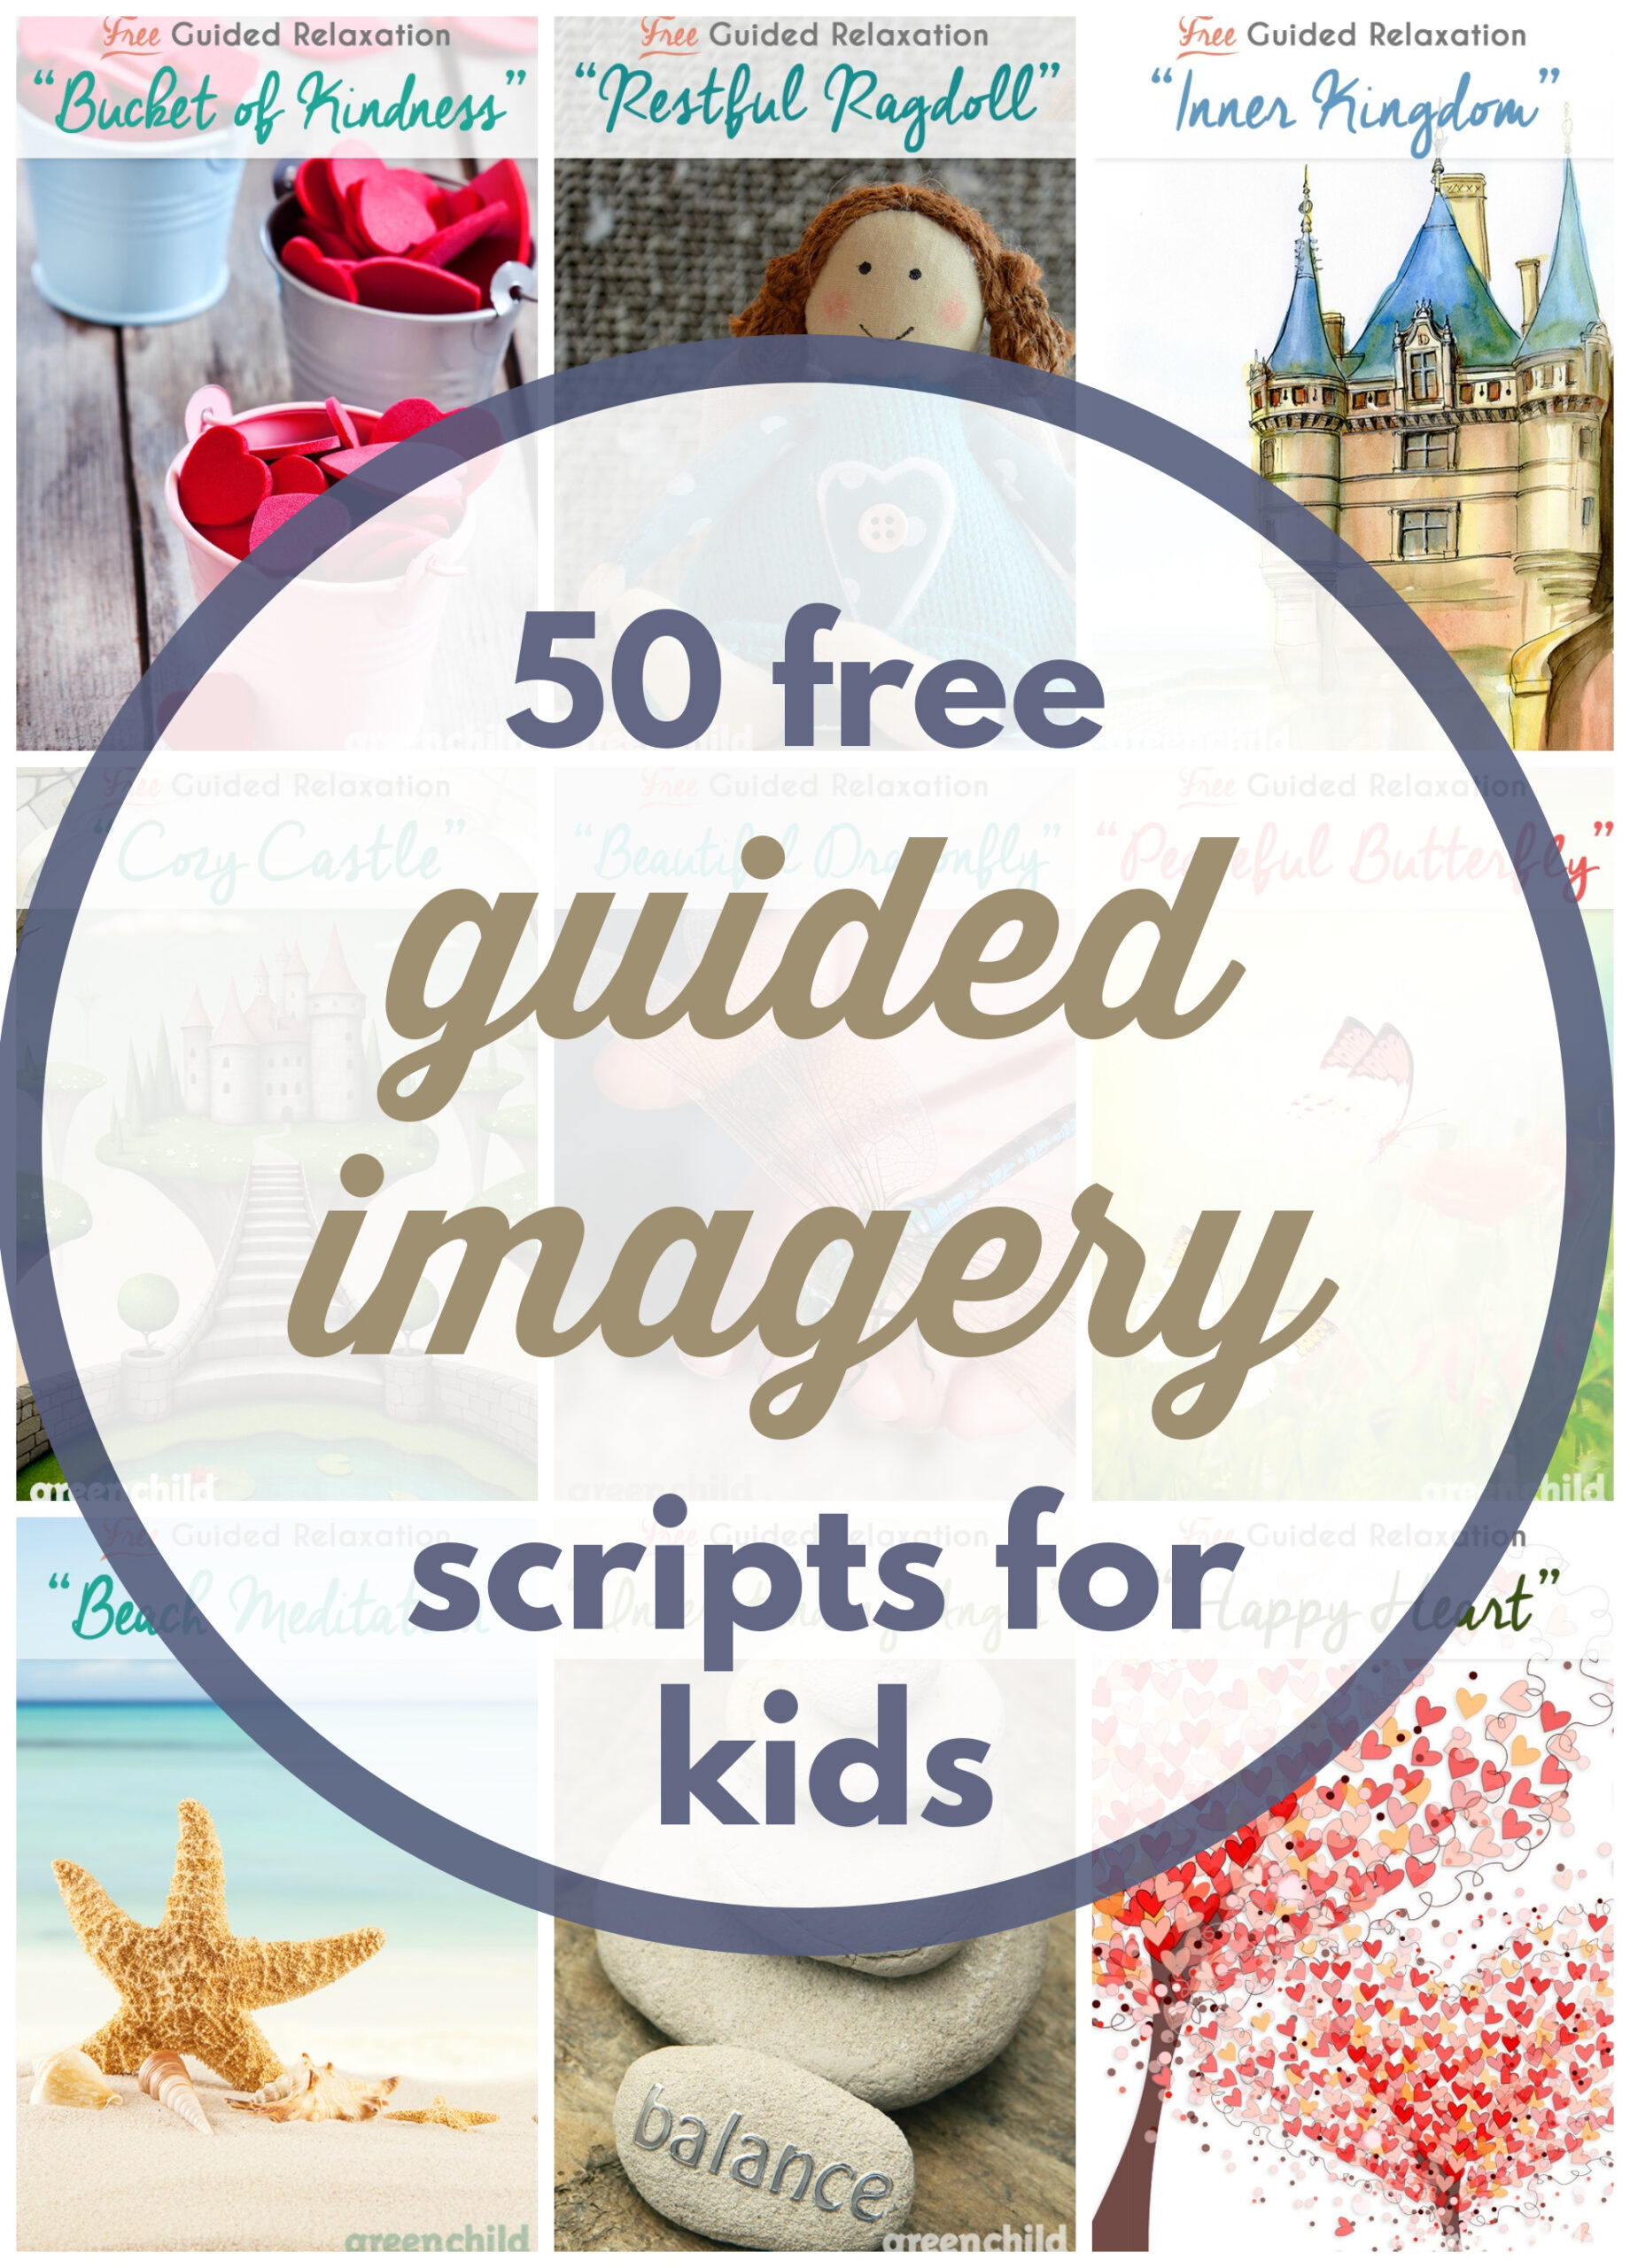 imagery examples for kids